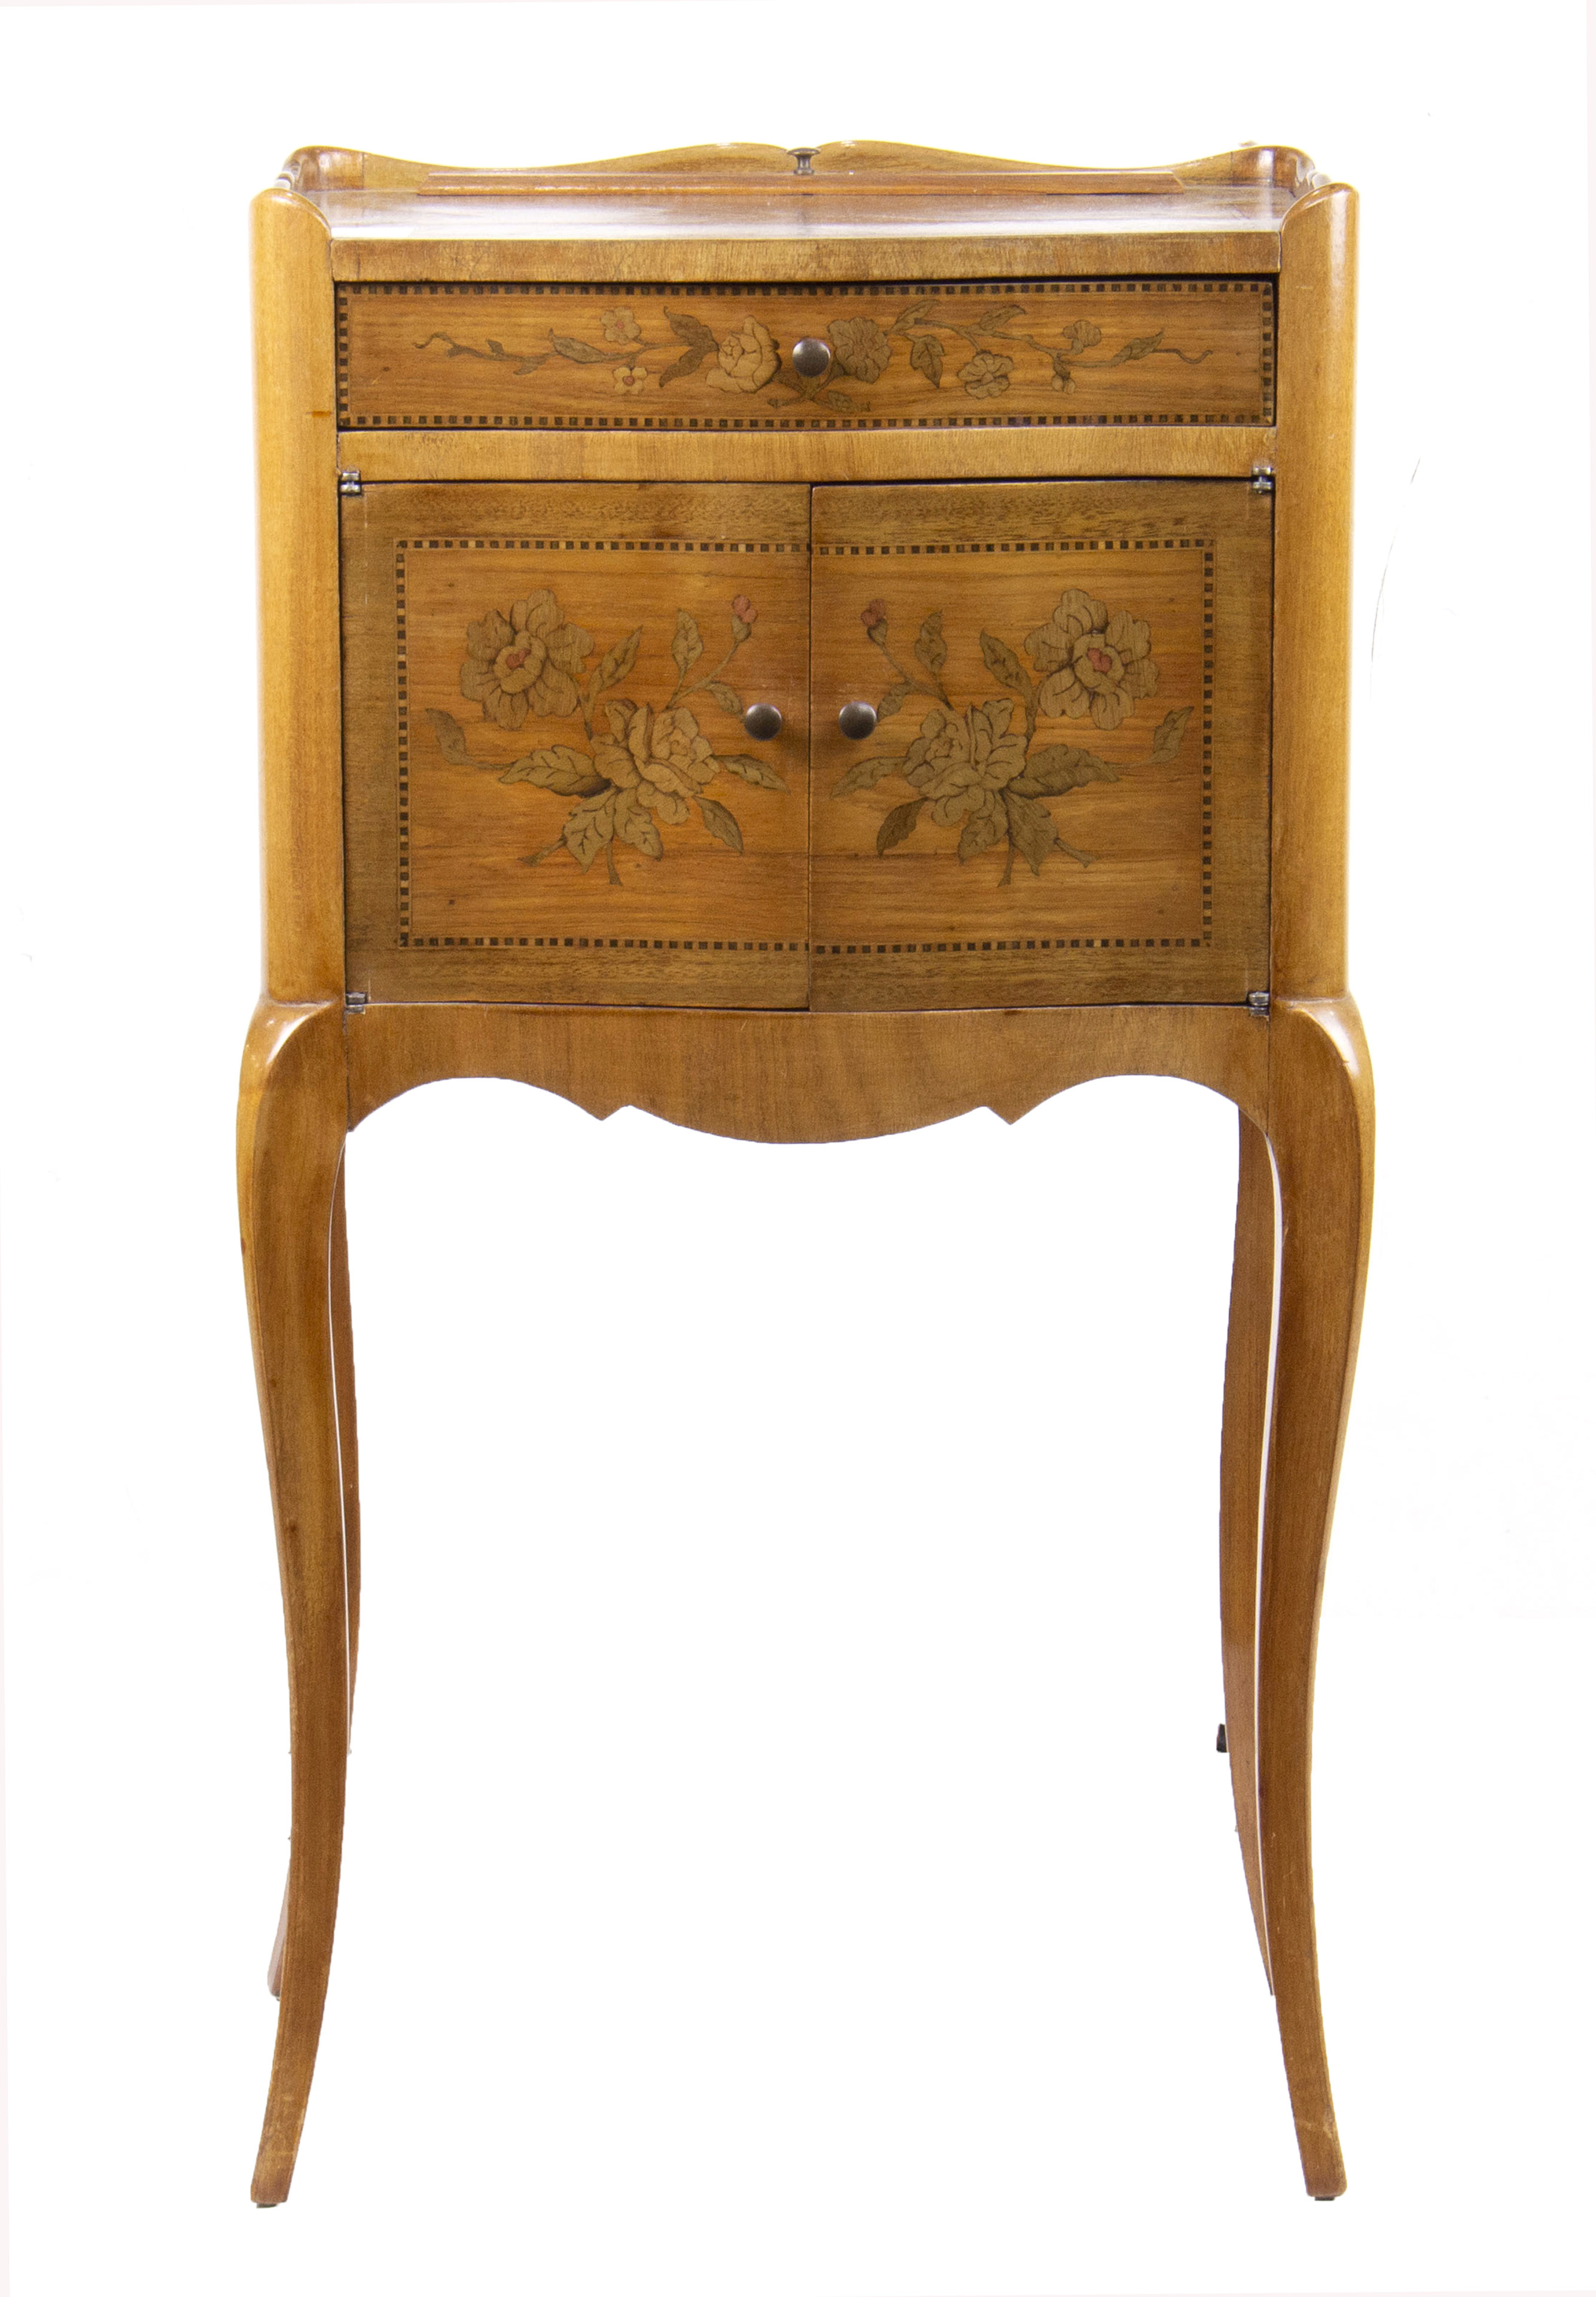 FRENCH PROVINCIAL INLAID DRESSING